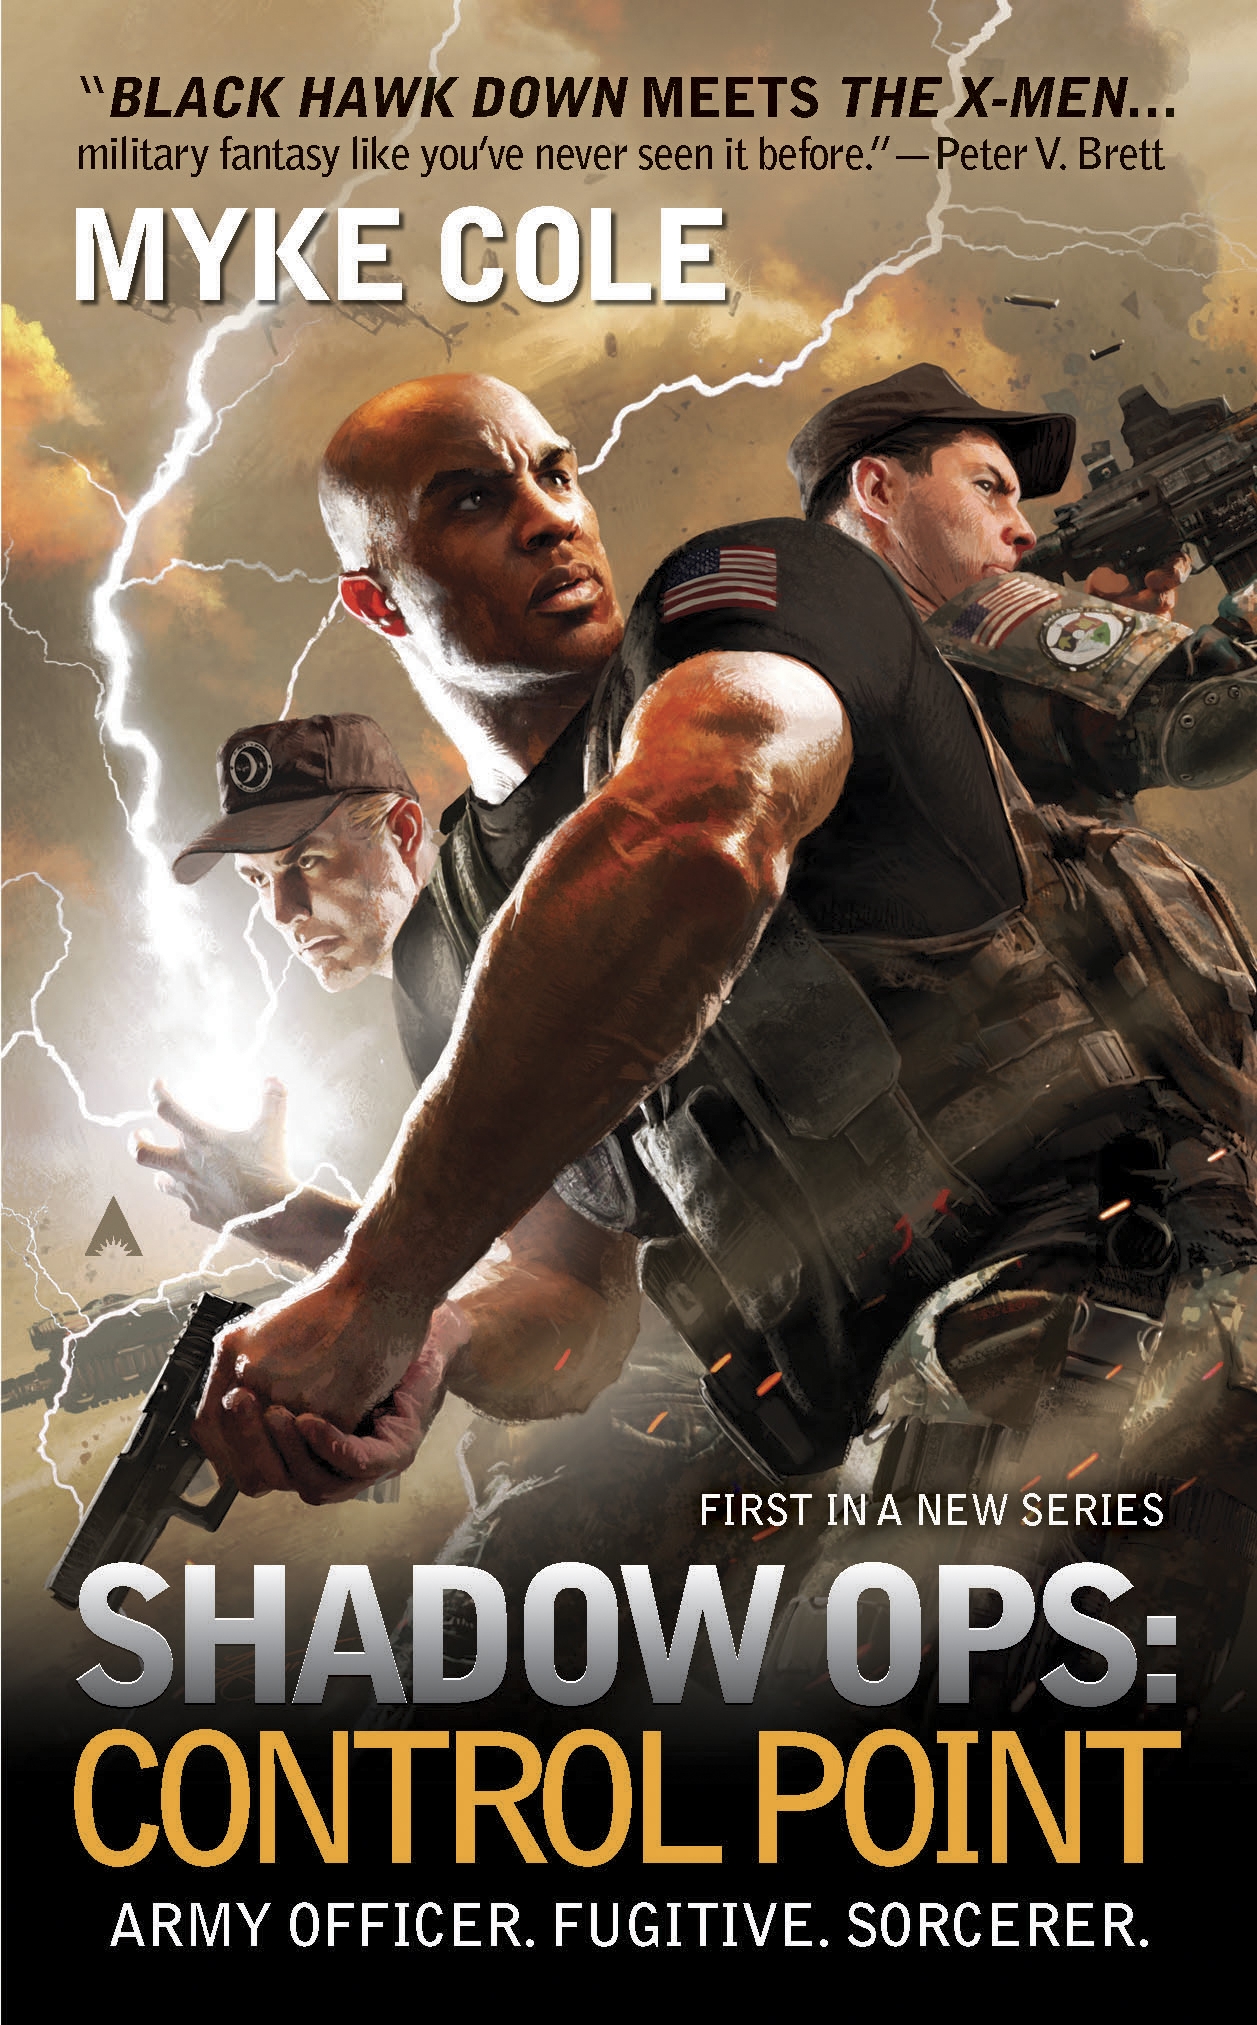 SHADOW OPS - cover art